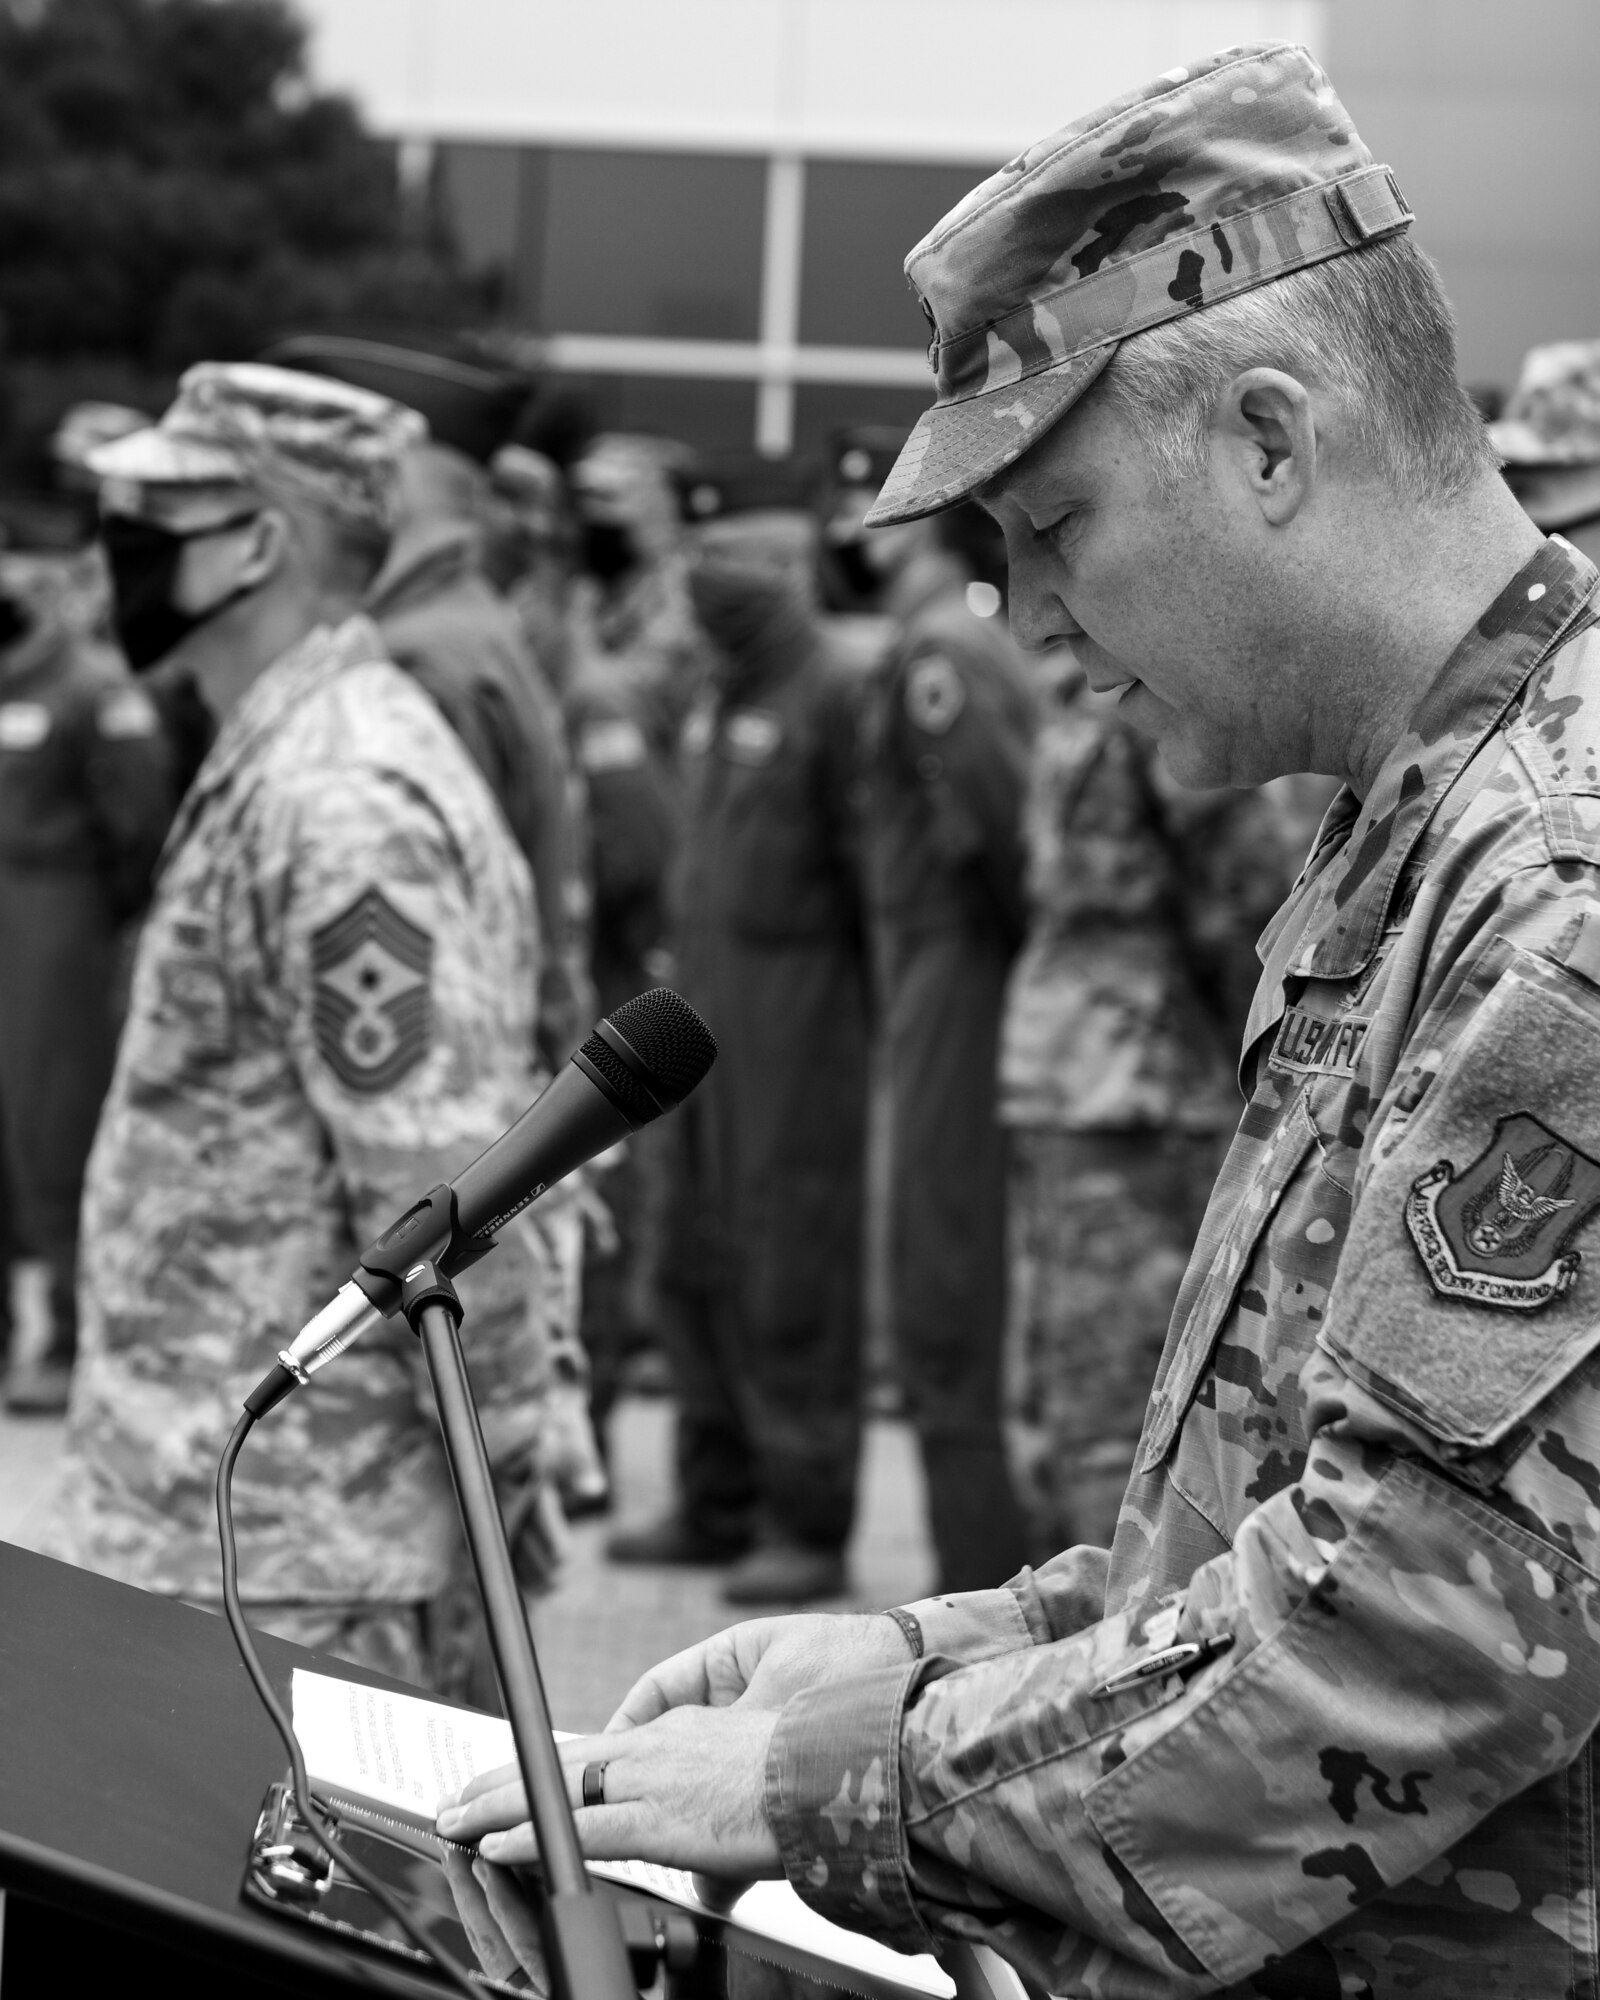 Maj. Scott Allen, the 910th Airlift Wing chief of public affairs, reads off the events of 9/11, Sept. 11, 2020, during Youngstown Air Reserve Station’s 9/11 remembrance ceremony. The installation has held a ceremony every year to honor those who lost their lives in the terrorist attacks at Sept. 11, 2001.